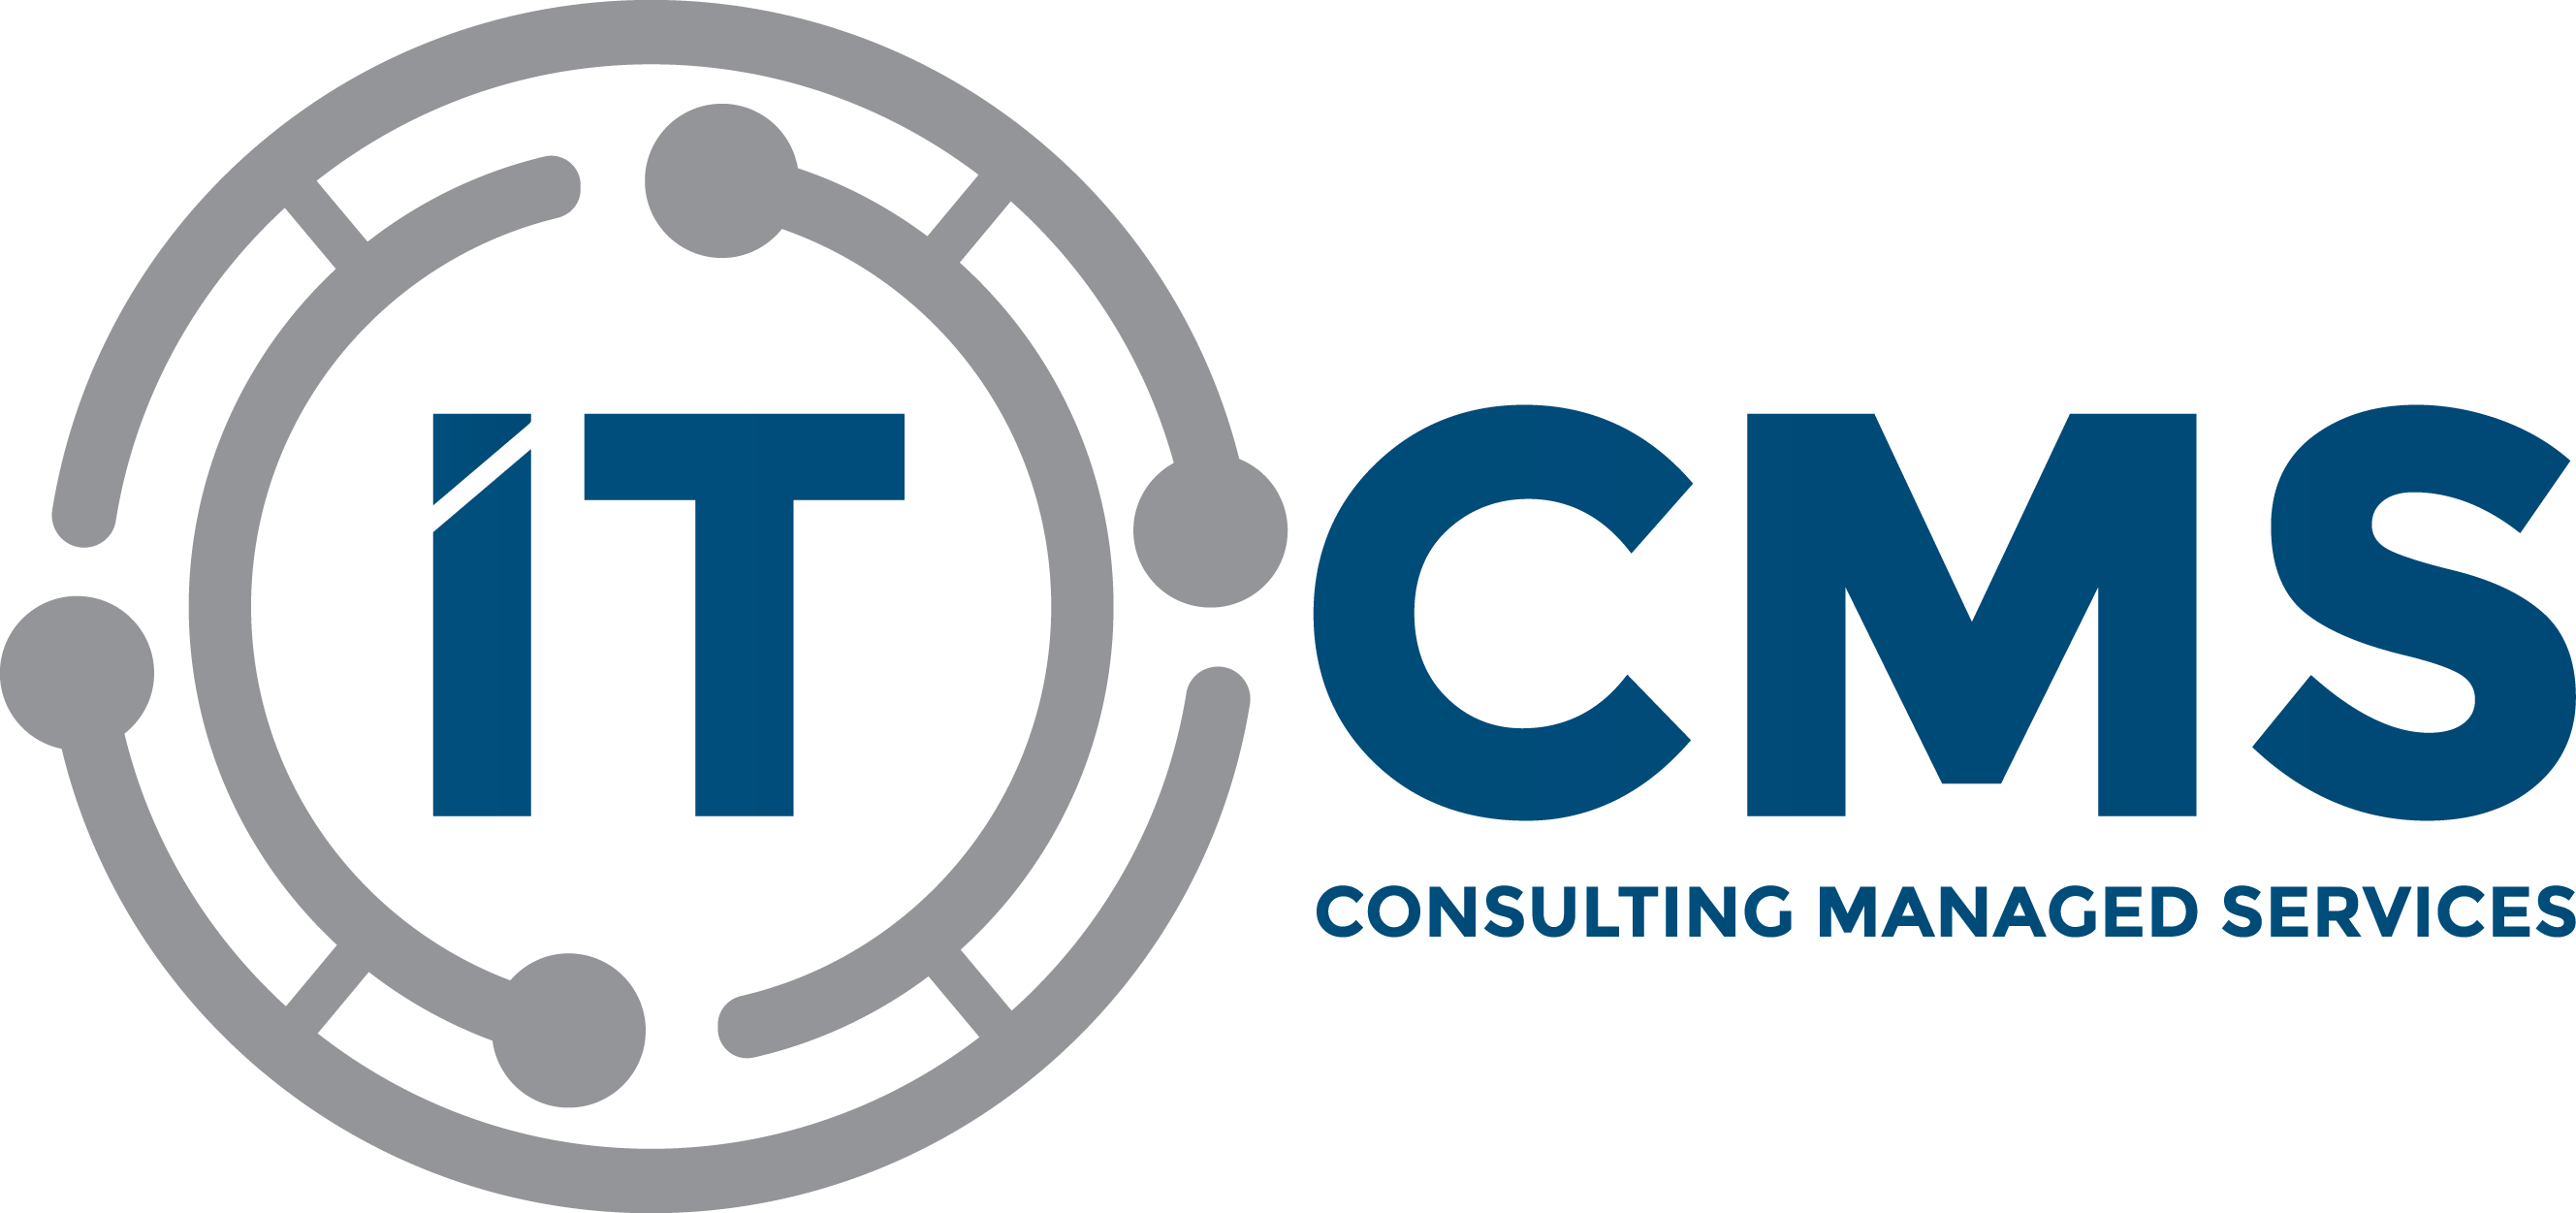 ITCMS IT Consulting Managed Services 